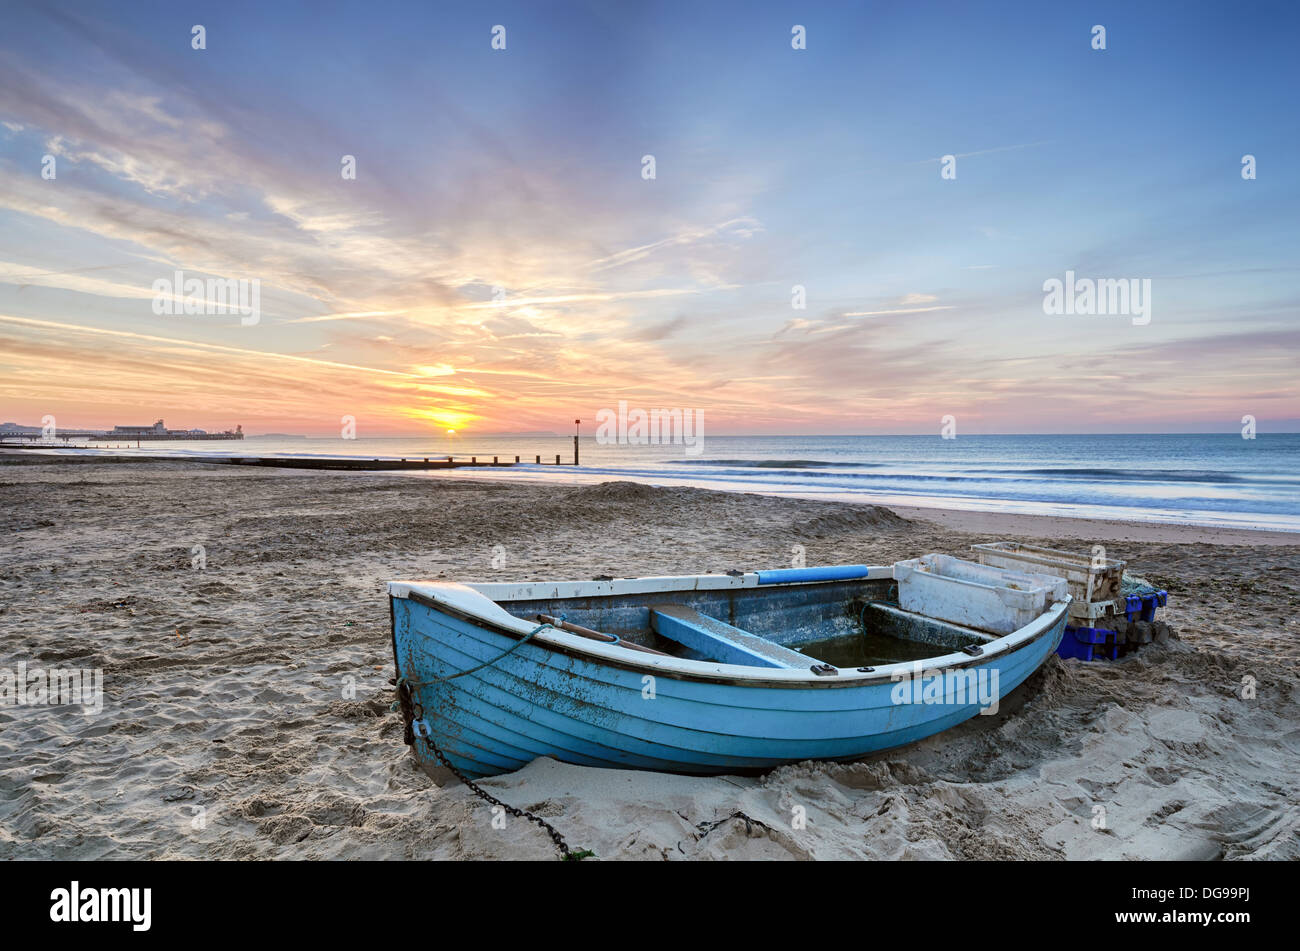 Turquoise blue fishing boat at sunrise on Bournemouth beach with pier in far distance Stock Photo